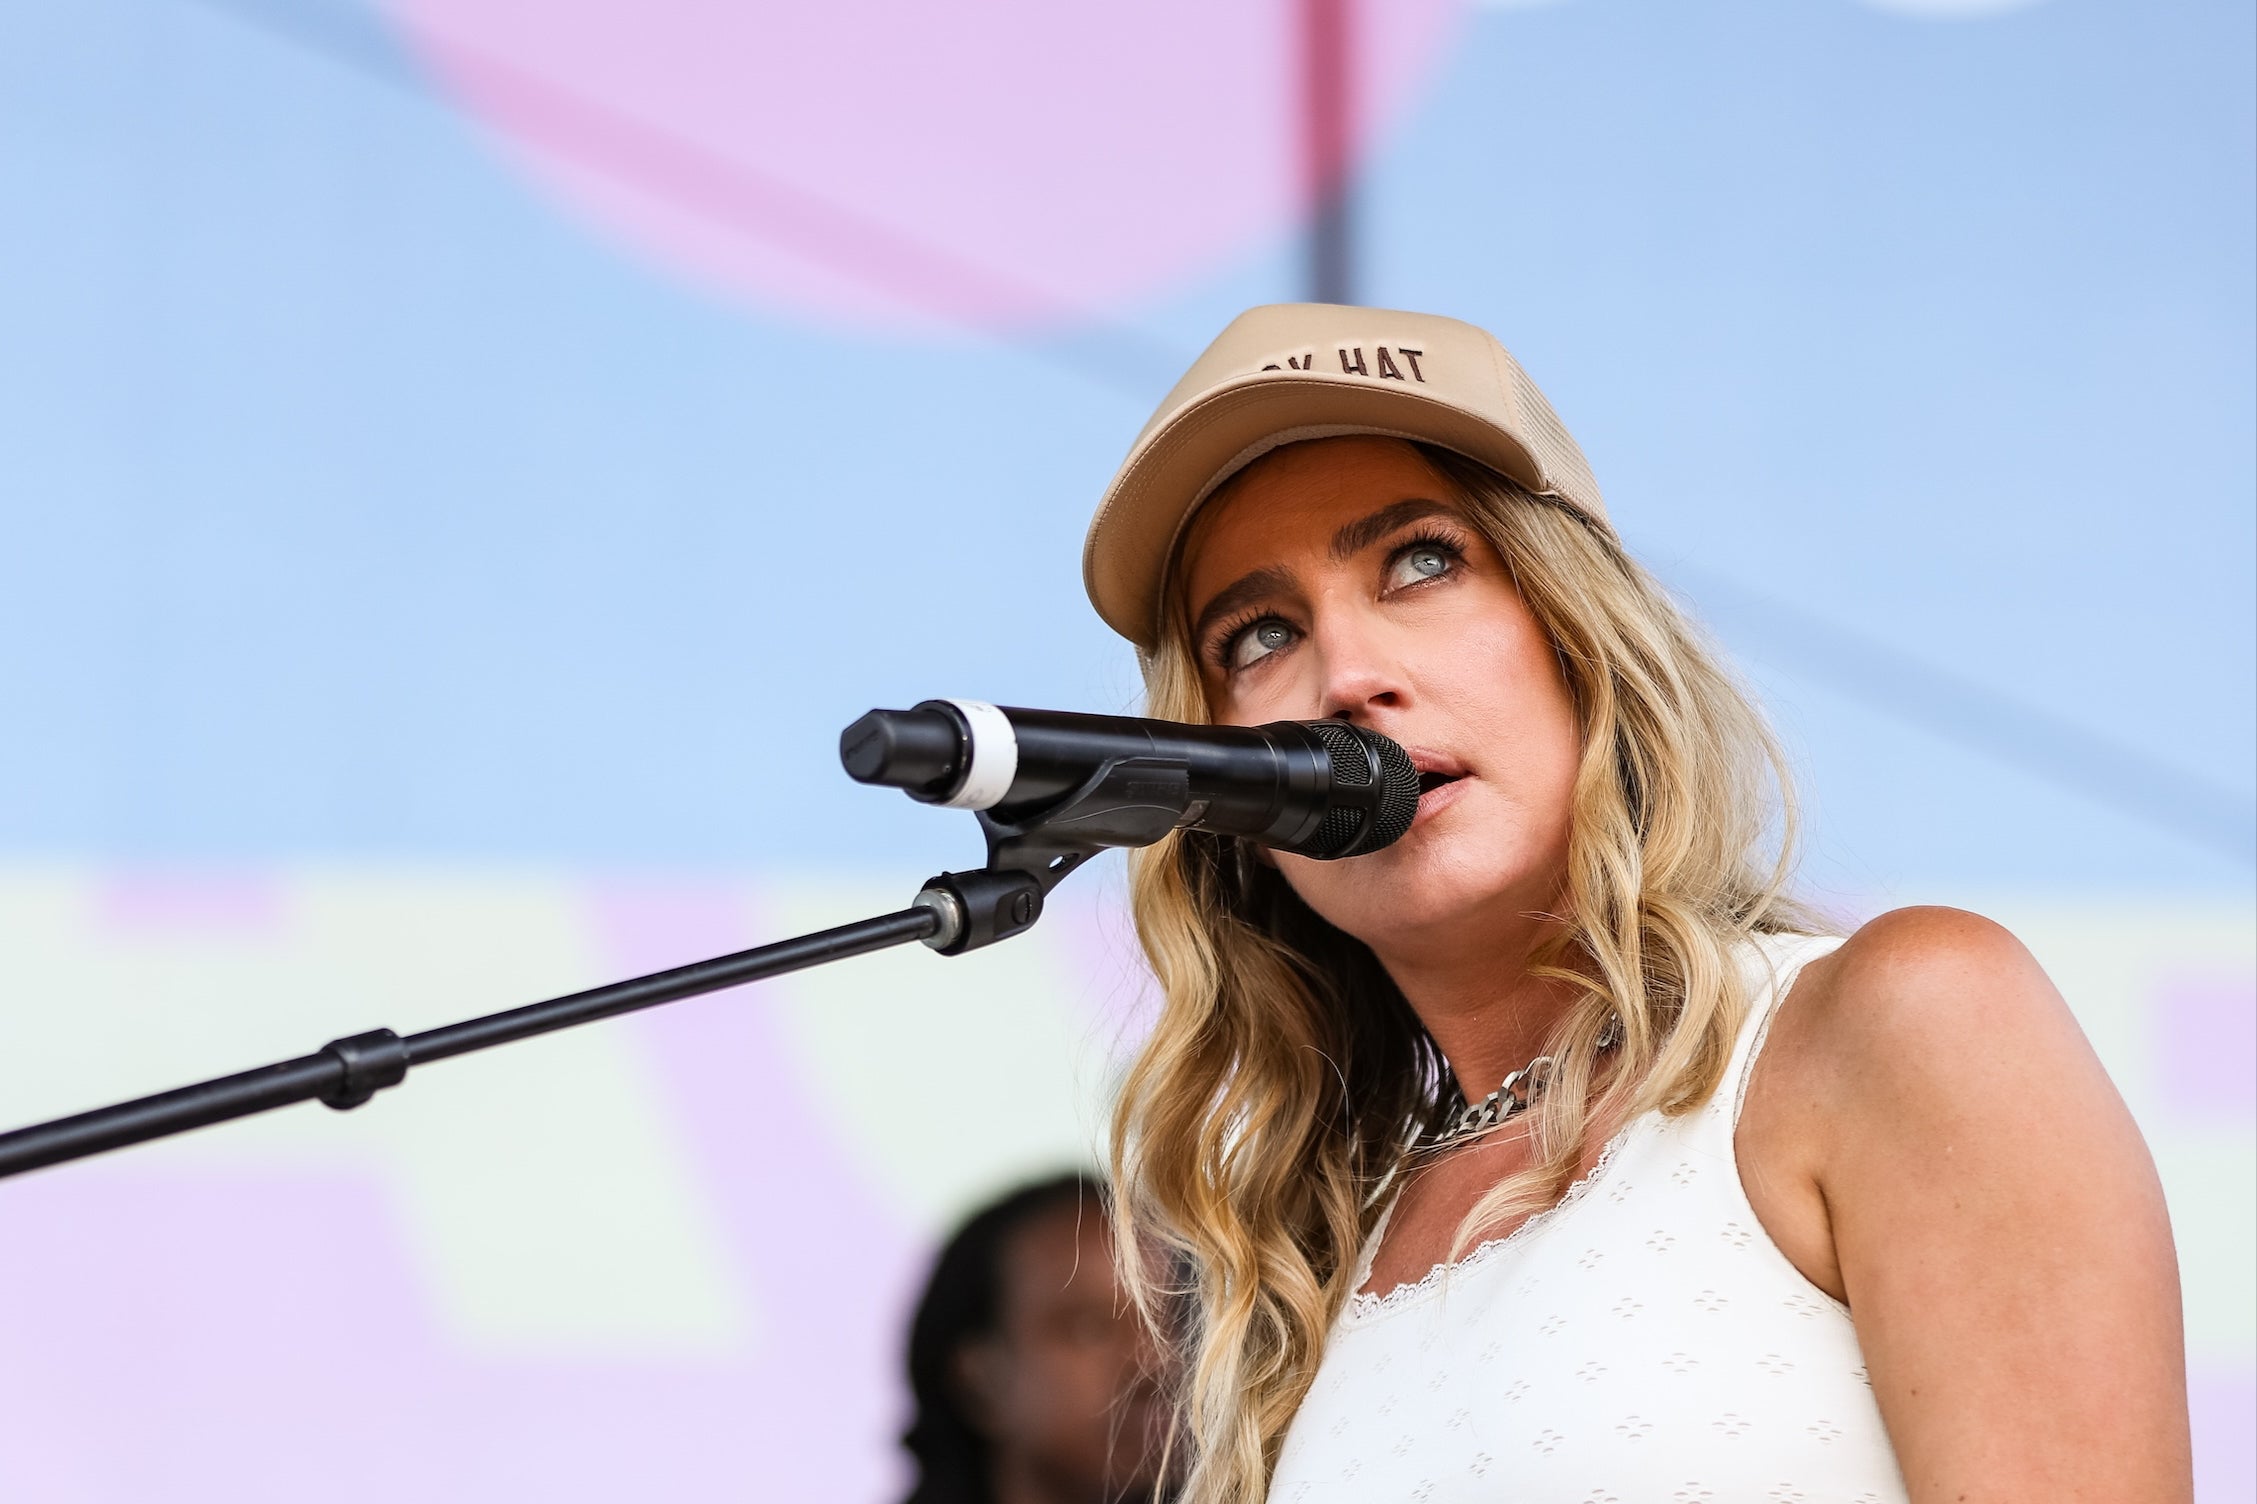 Grammy-nominated singer Ingrid Andress was criticized on social media for her rendition of the national anthem at the Home Run Derby